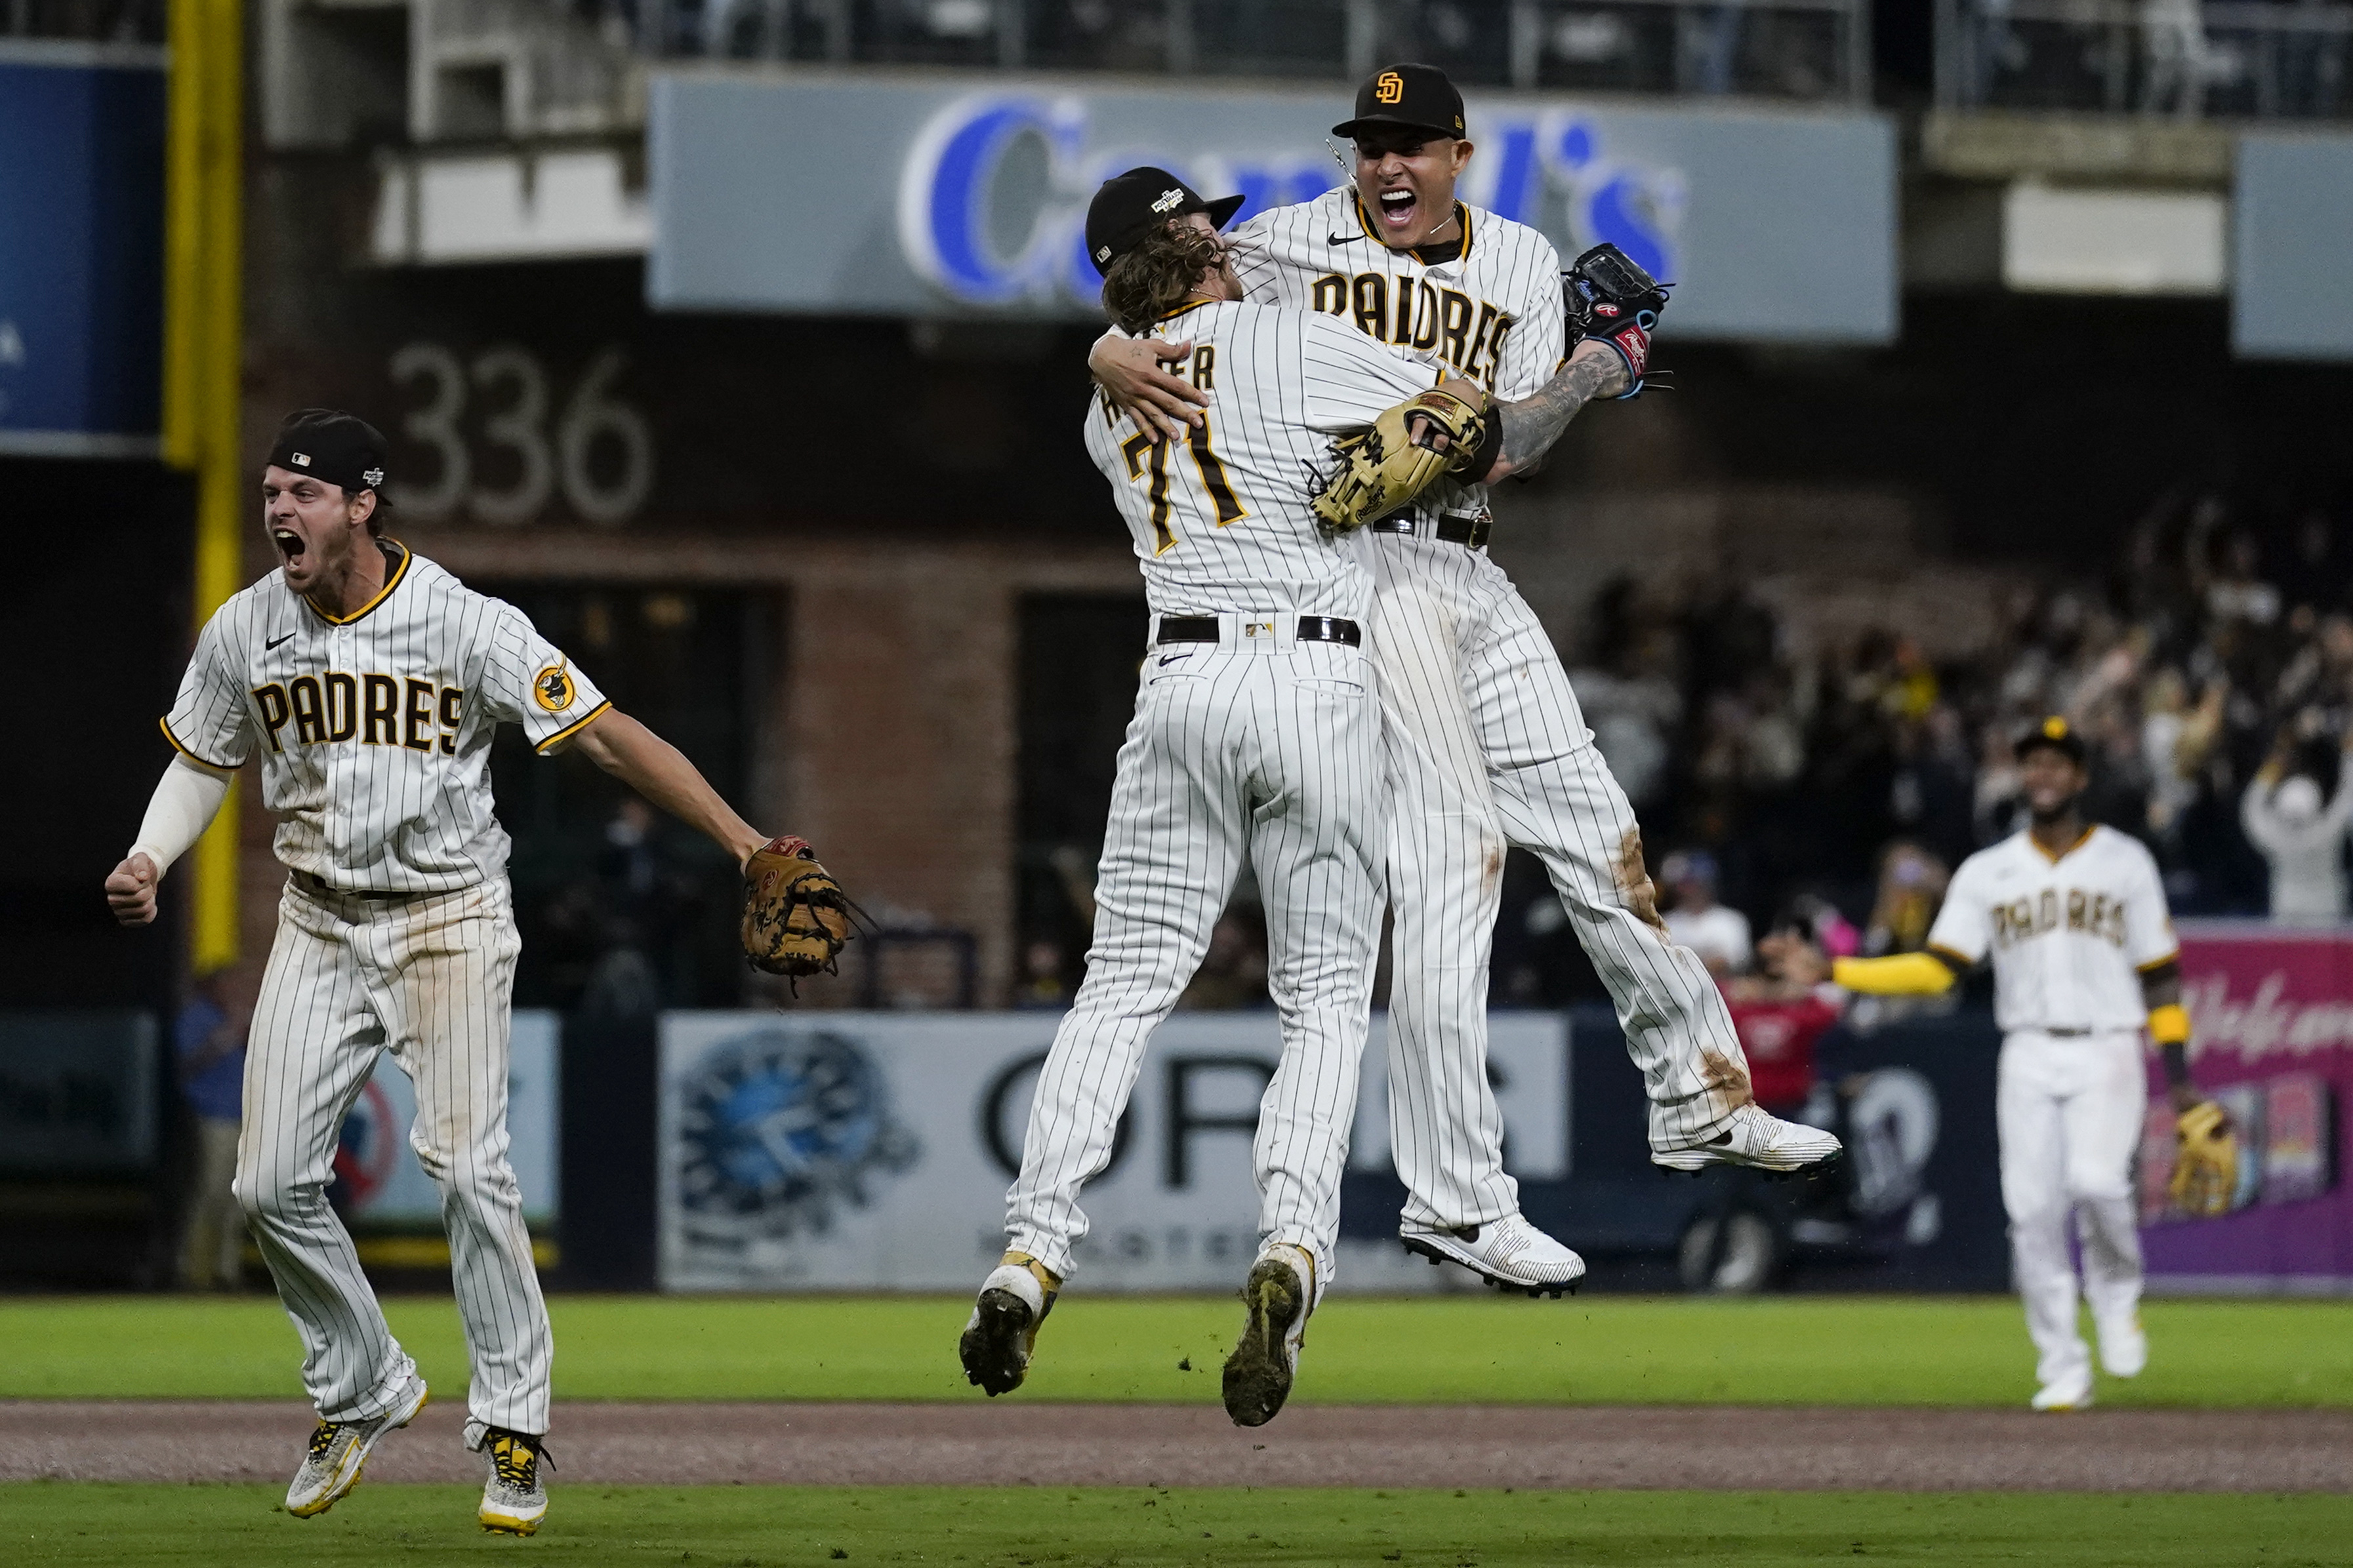 Padres bounce Dodgers from playoffs with 5-3 win, advance to first